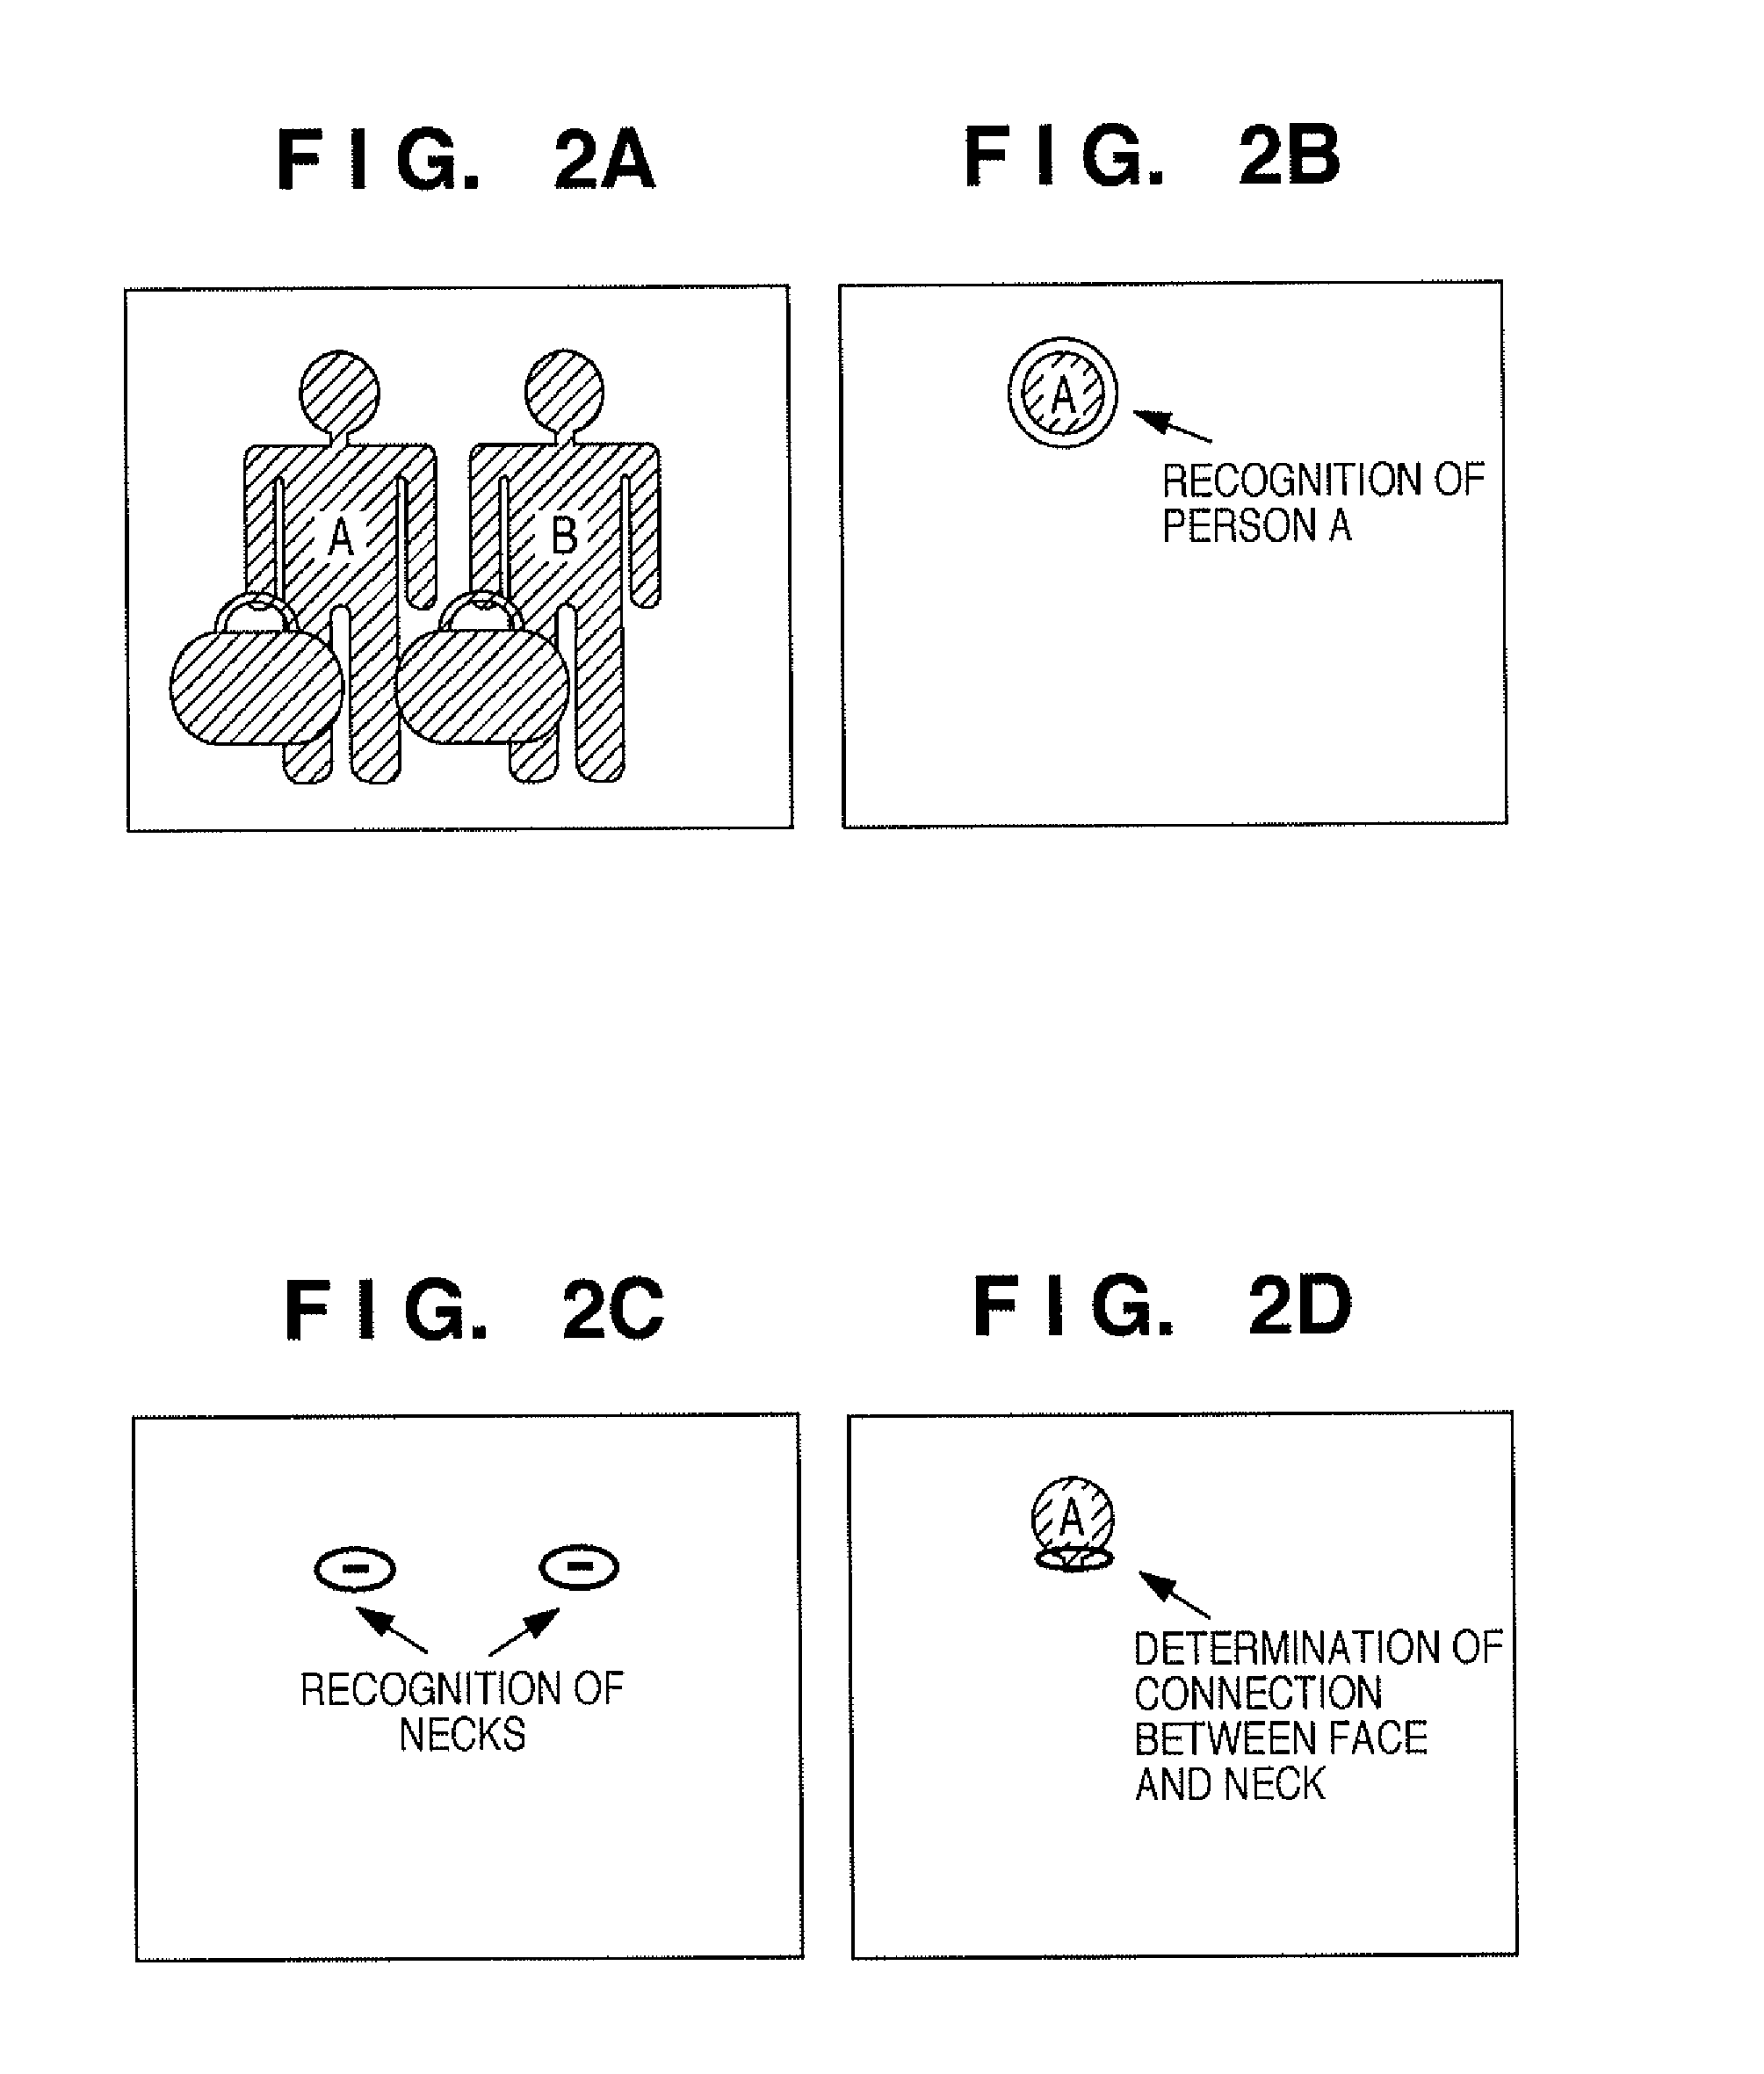 Image recognition apparatus and image recognition method